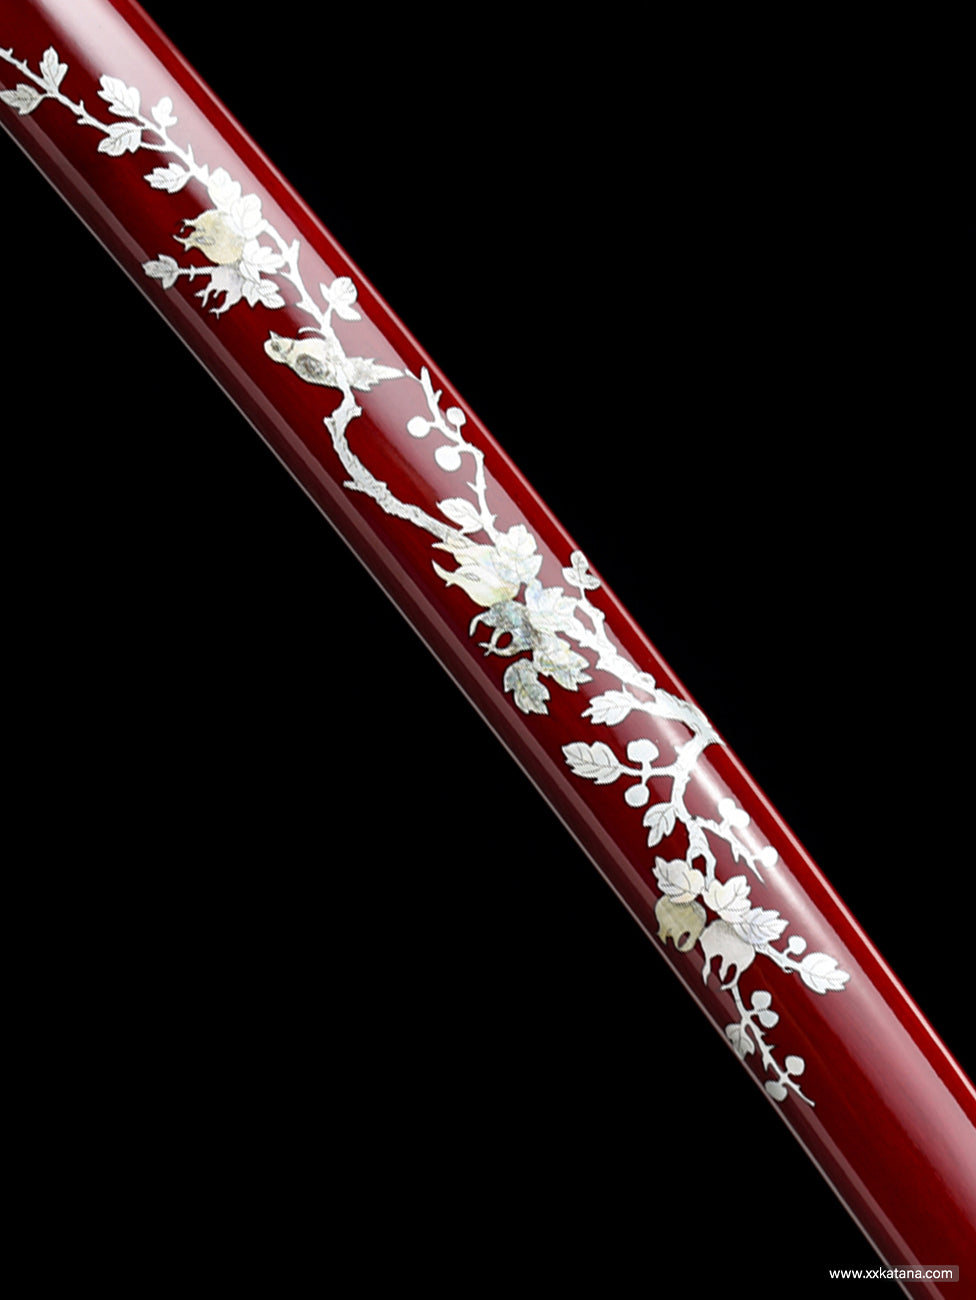 red plum blossom katana forge folded steel swords Collectible